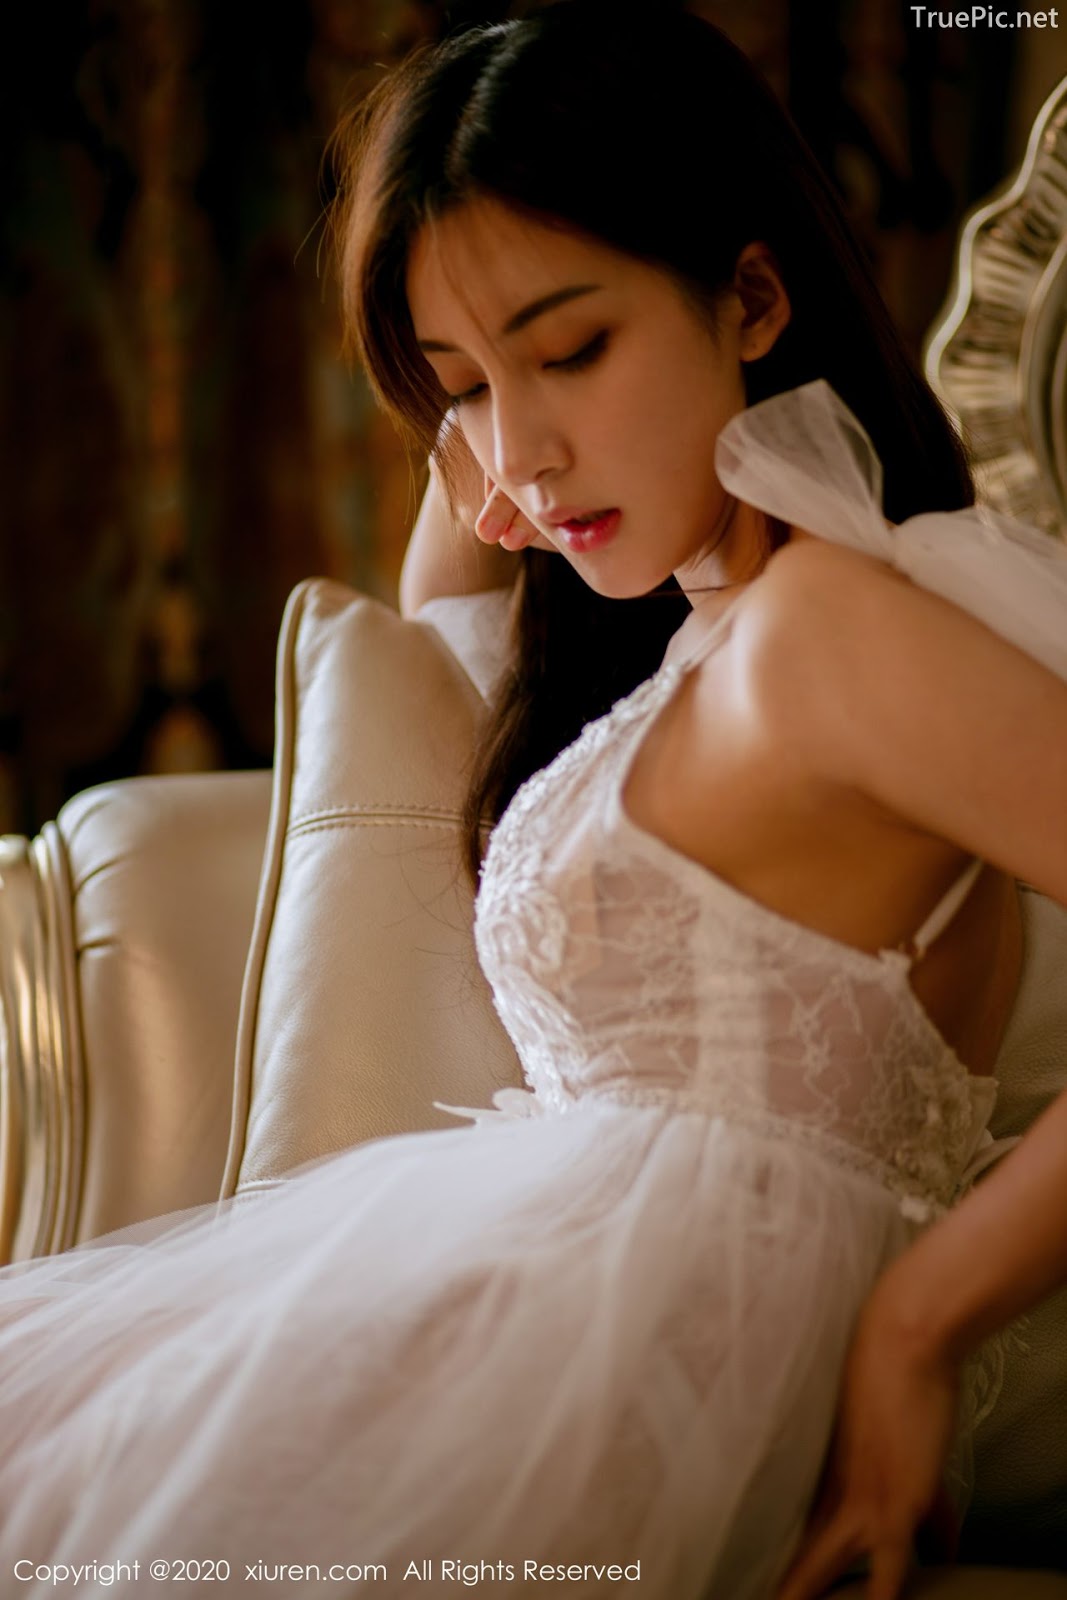 XIUREN No.1914 - Chinese model 林文文Yooki so Sexy with Transparent White Lace Dress - Picture 36